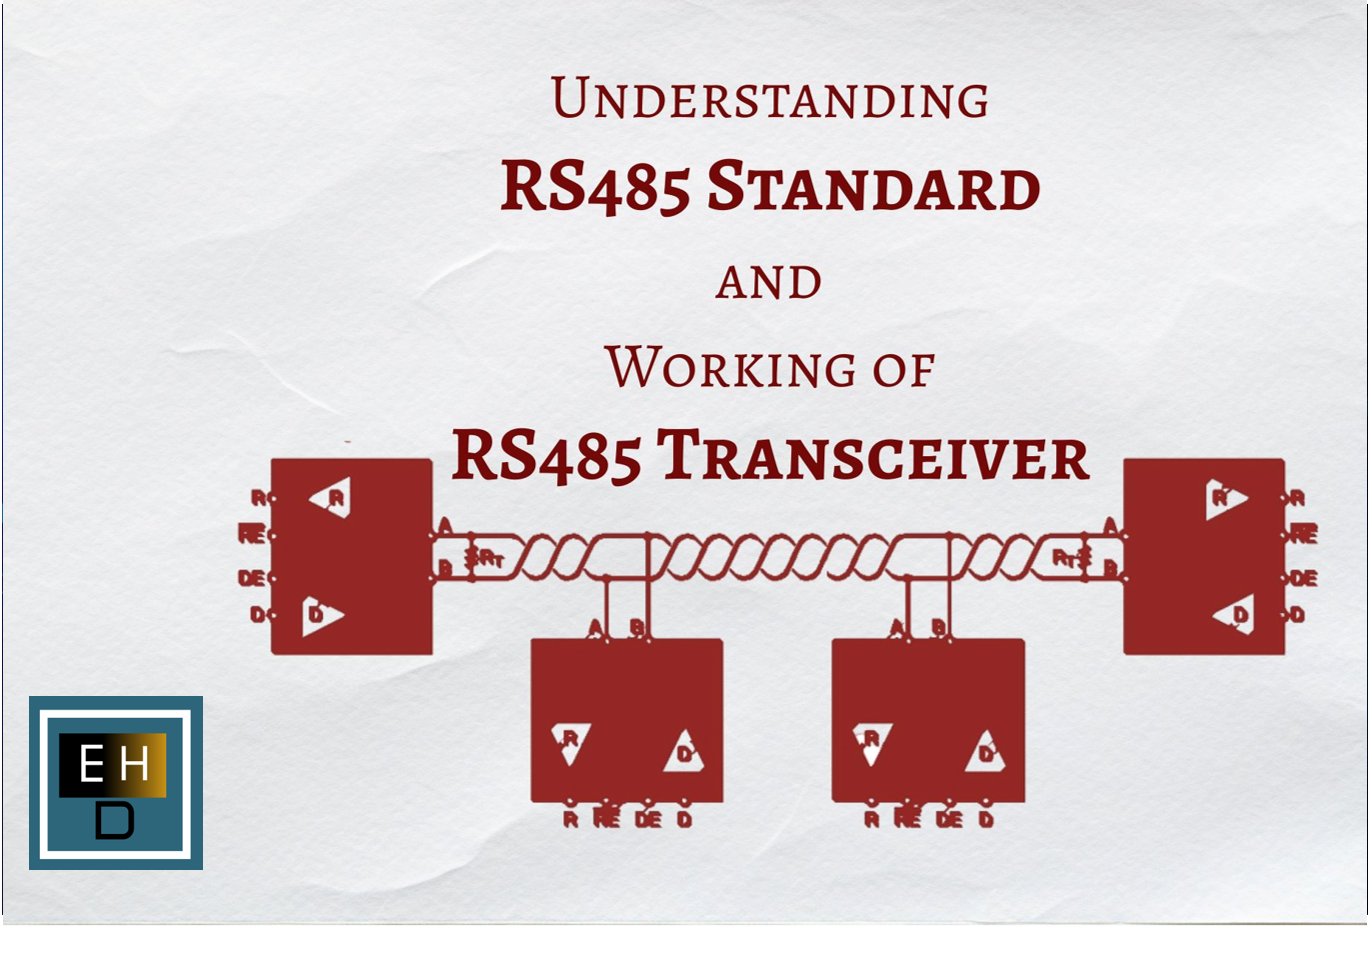 Understanding RS485 Standard and working of RS485 transceiver